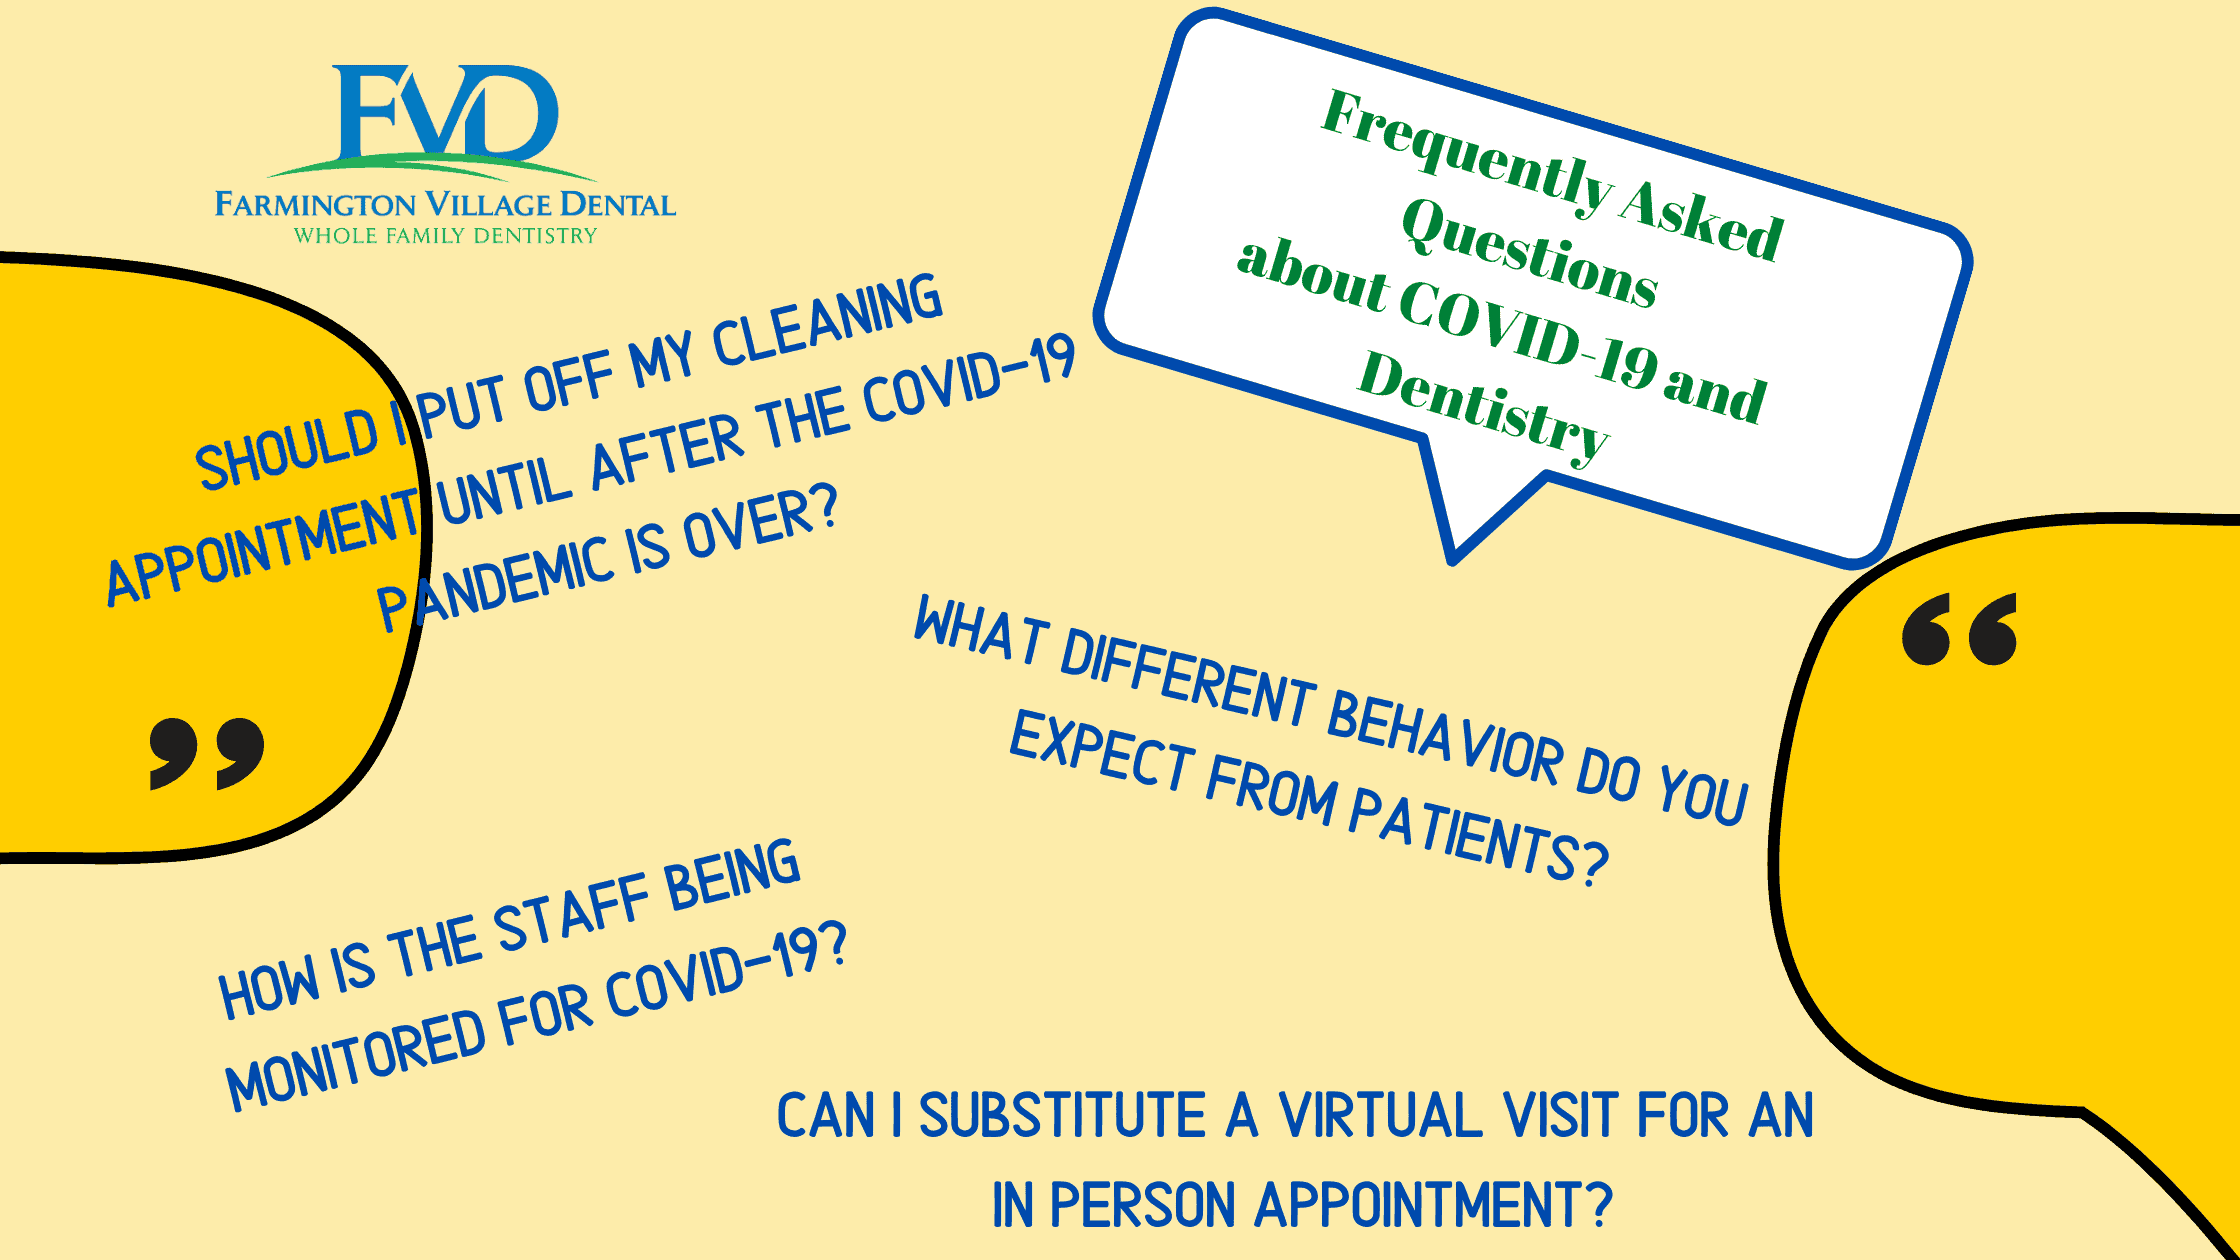 Visiting the dentist during COVID-19 - Frequently Asked Questions